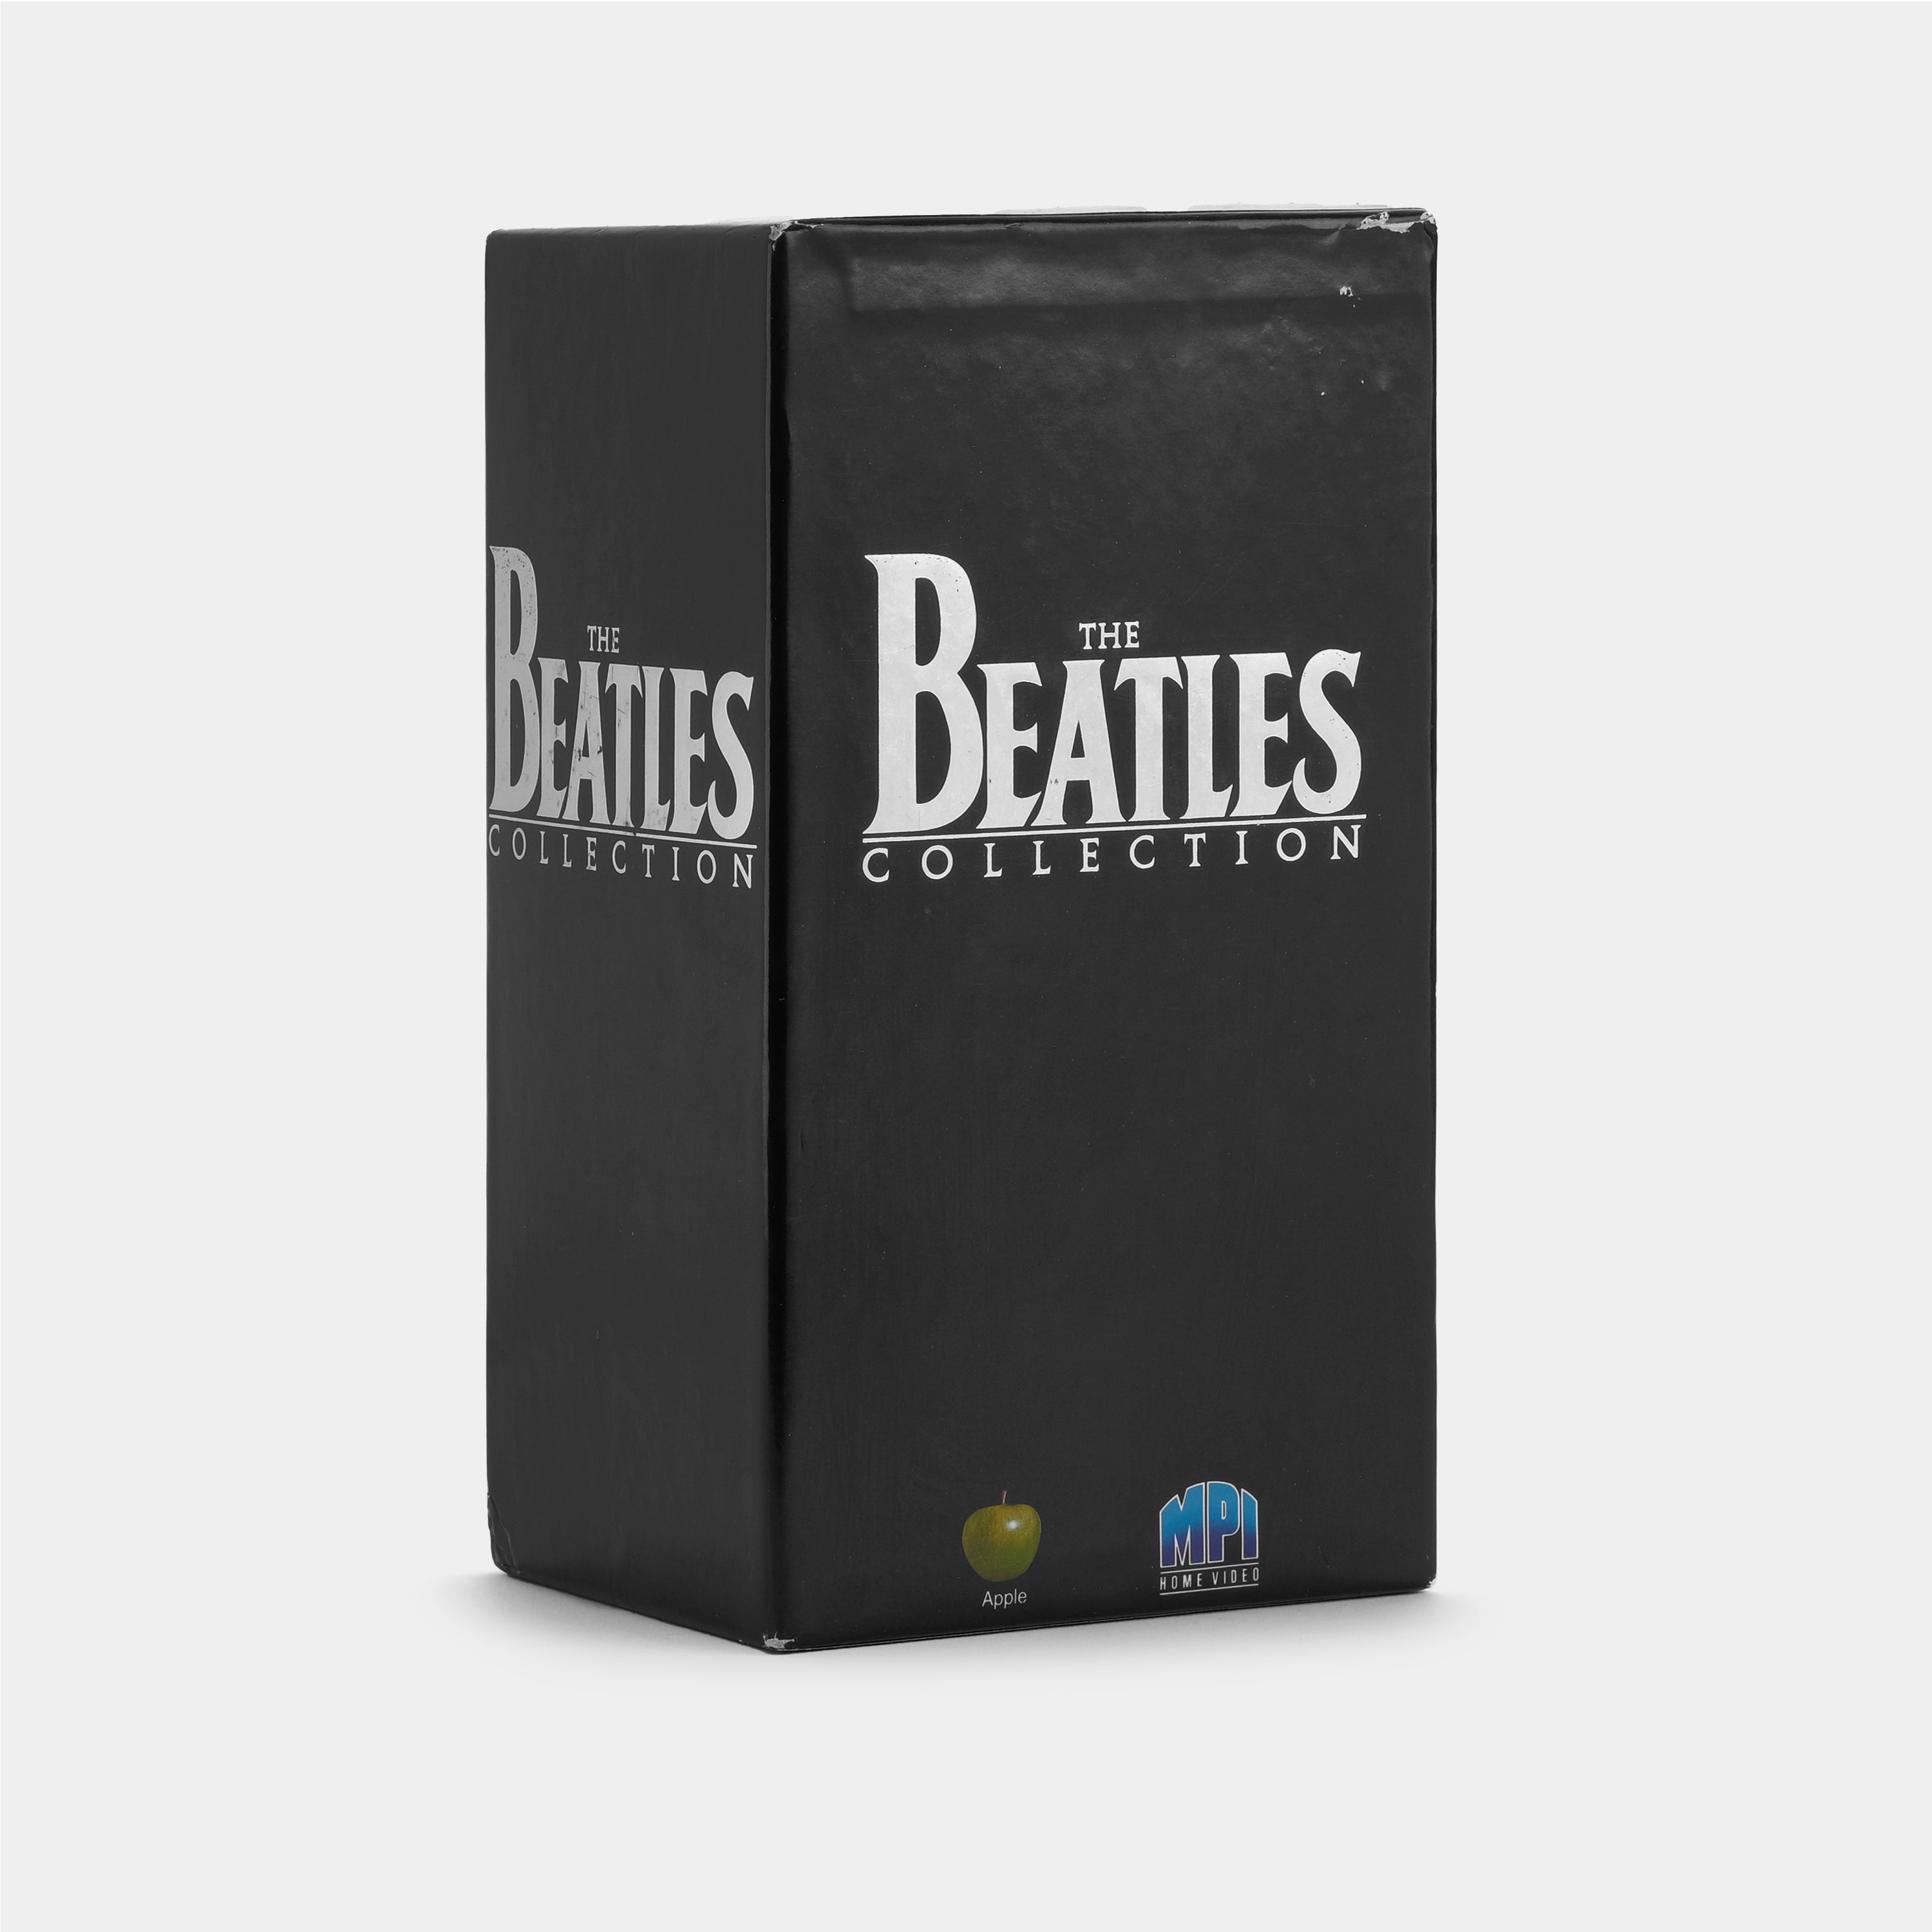 The Beatles Collection VHS Tape Set